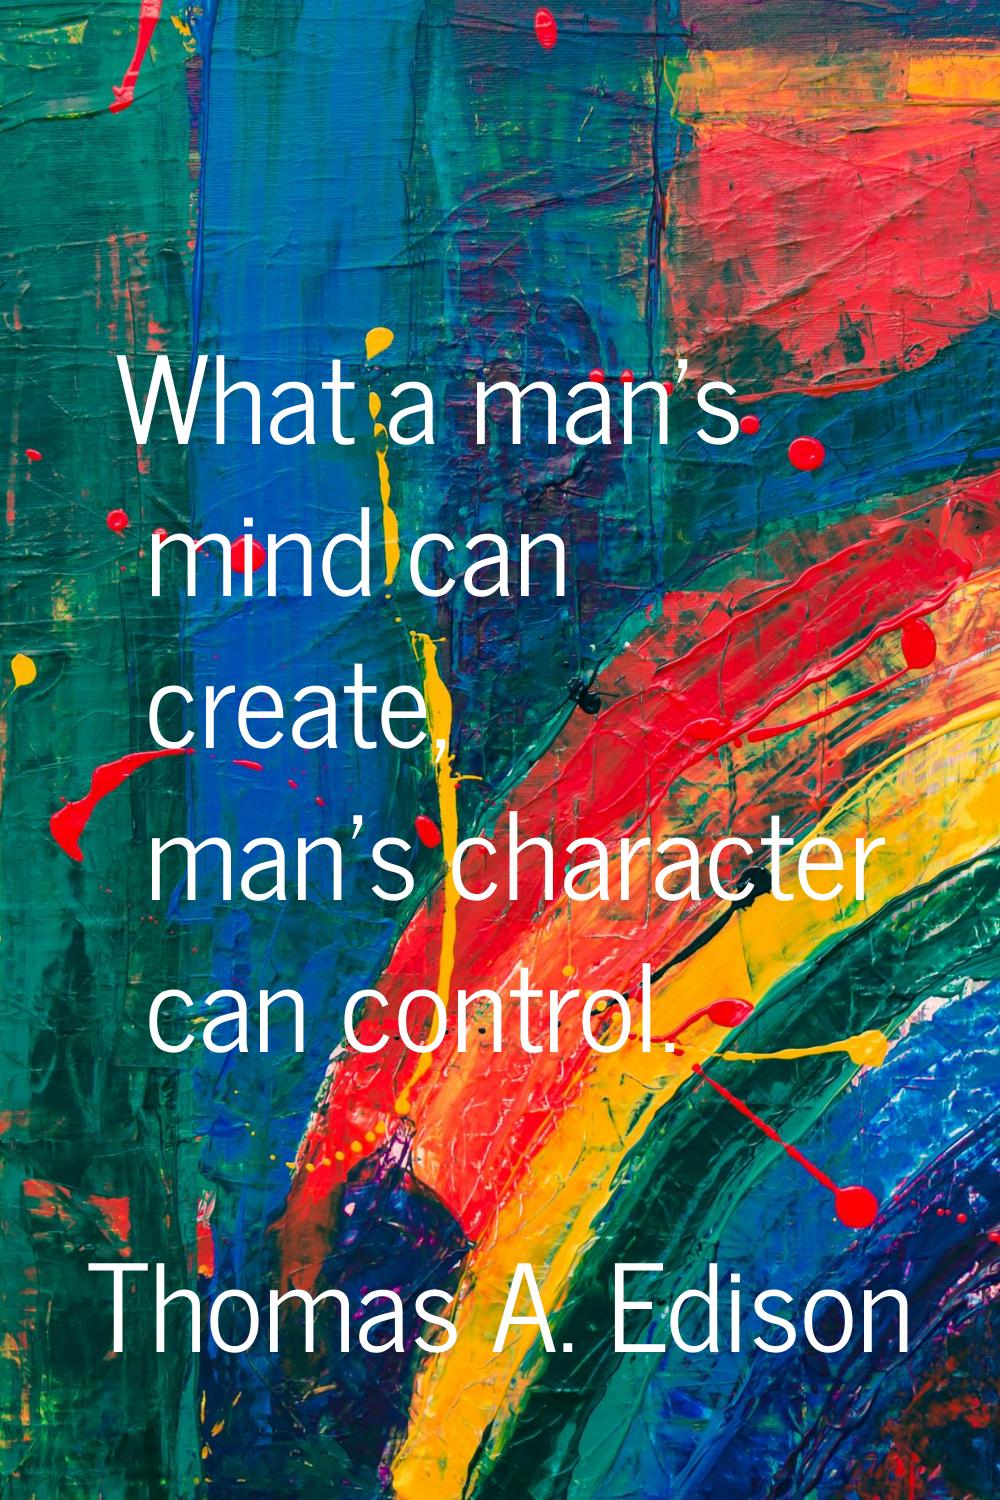 What a man's mind can create, man's character can control.